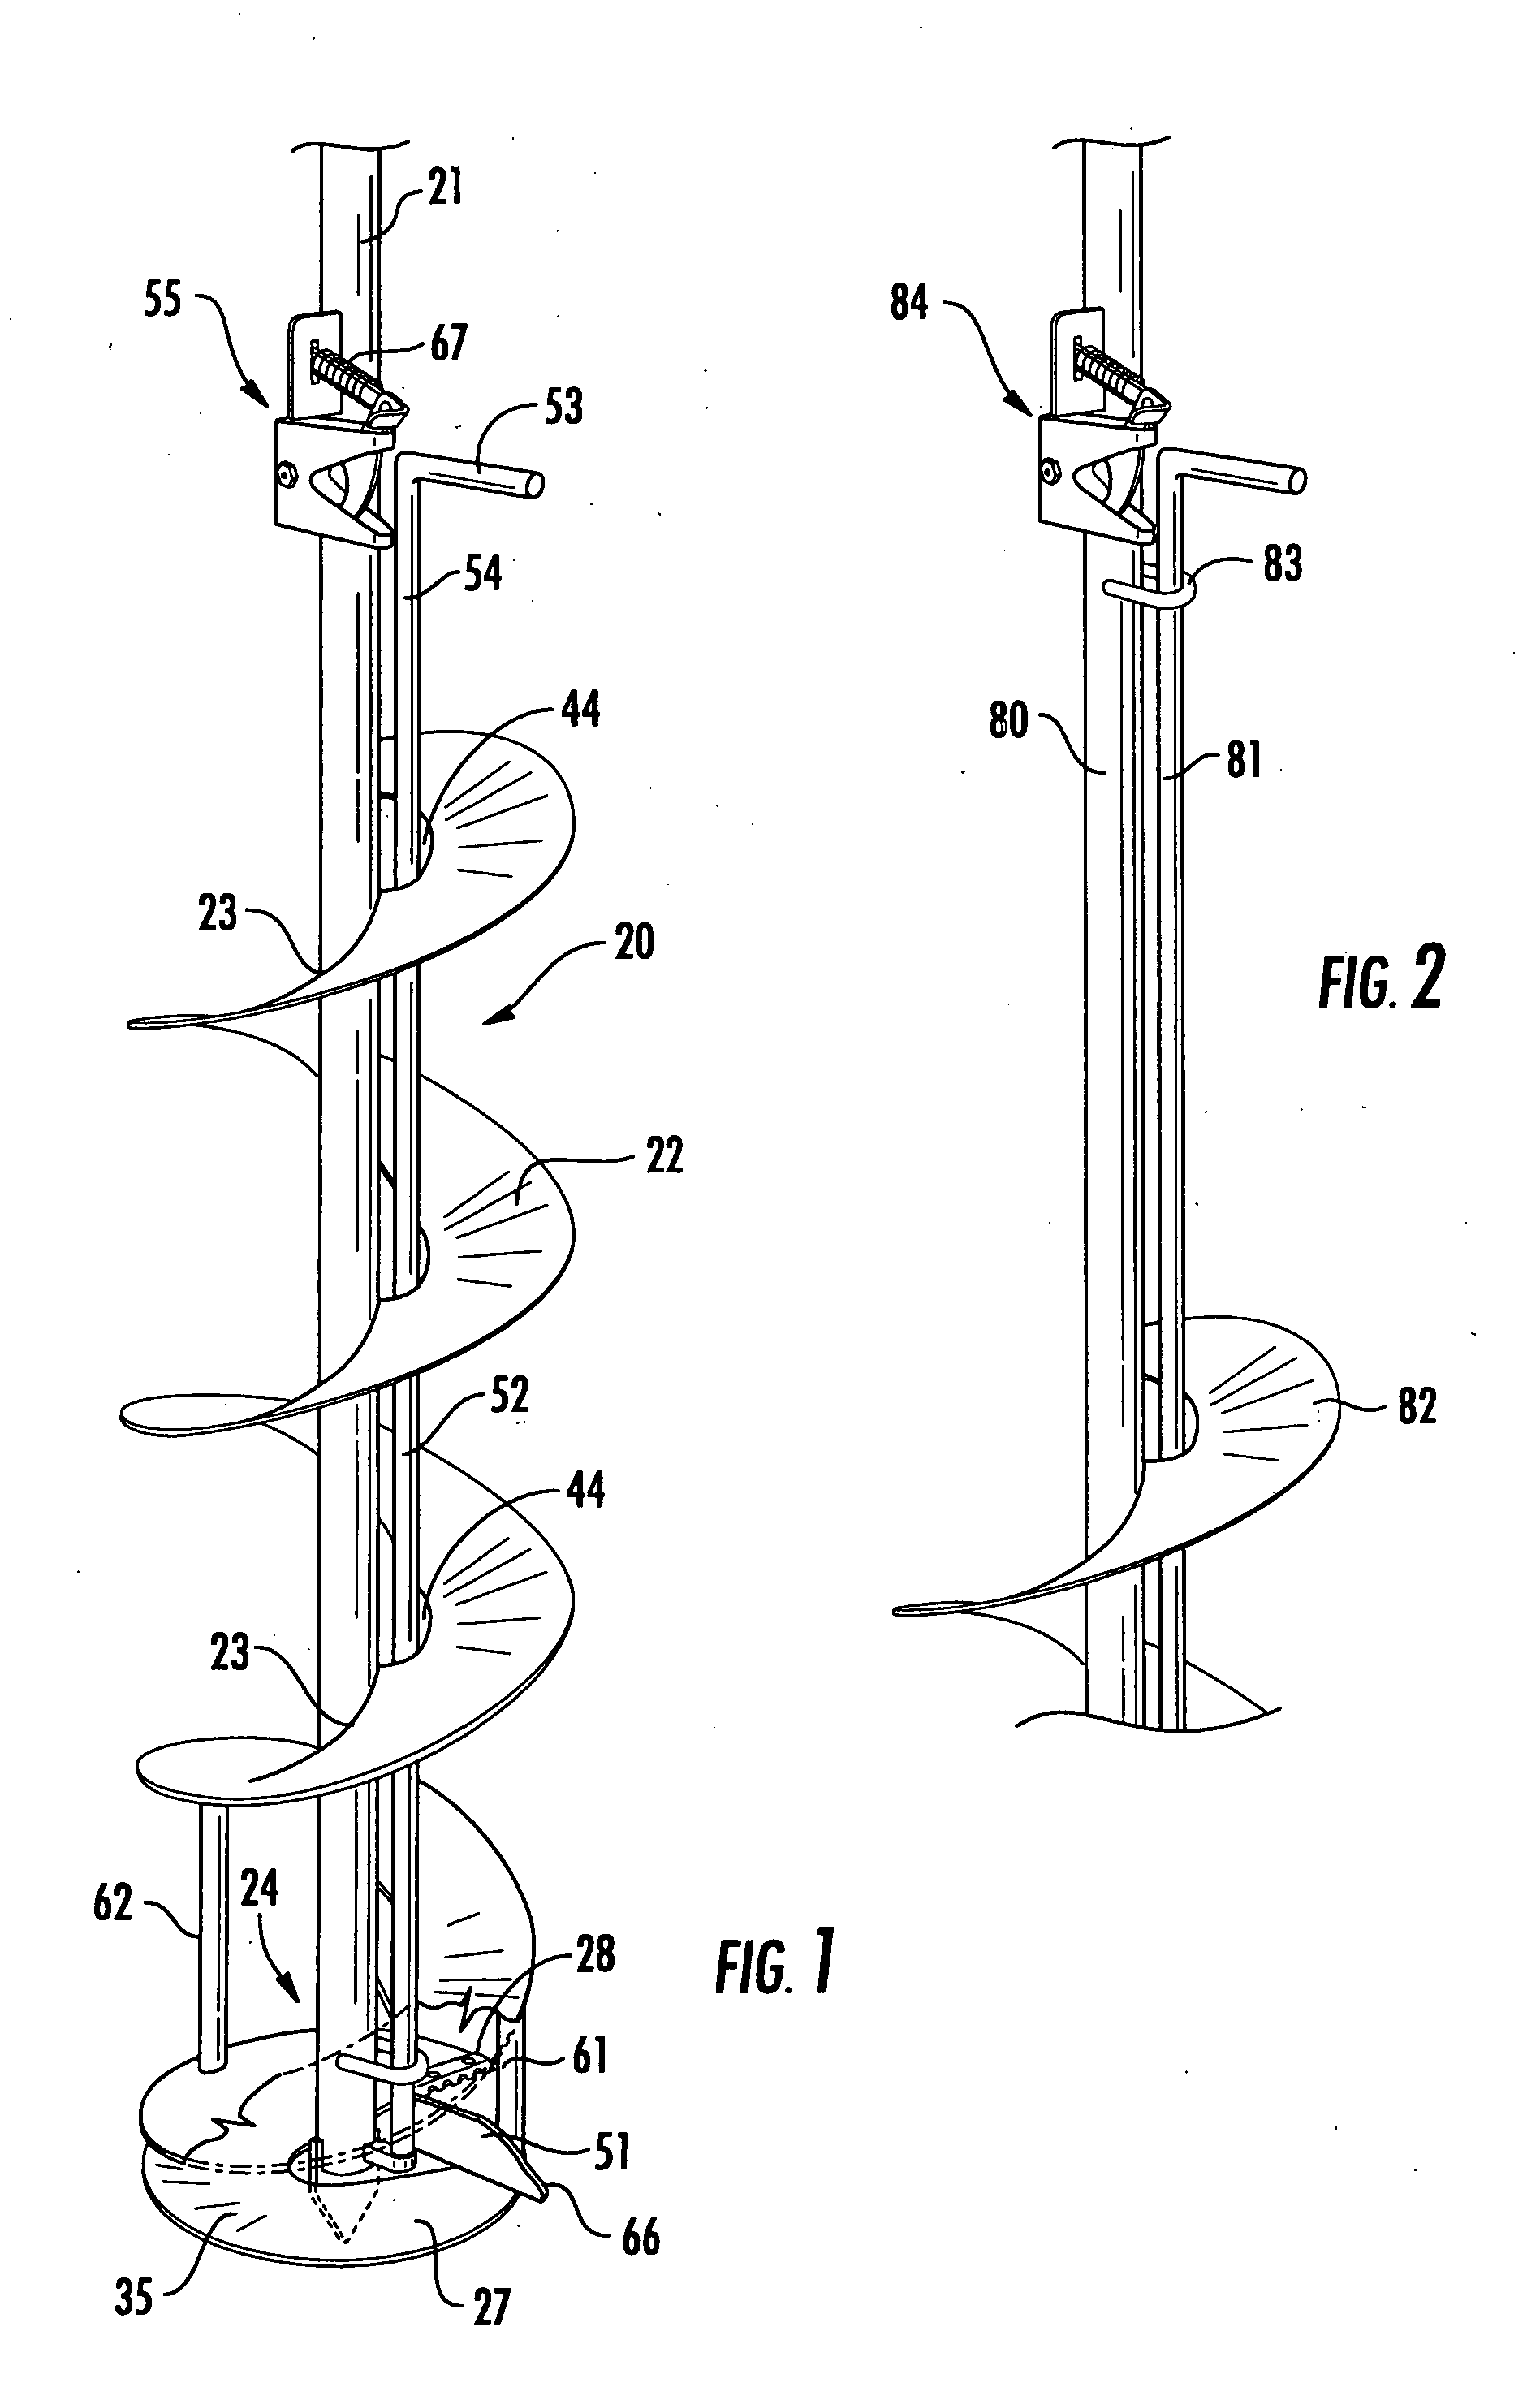 Ice Auger Assembly Incorporating an Ice Reaming Blade